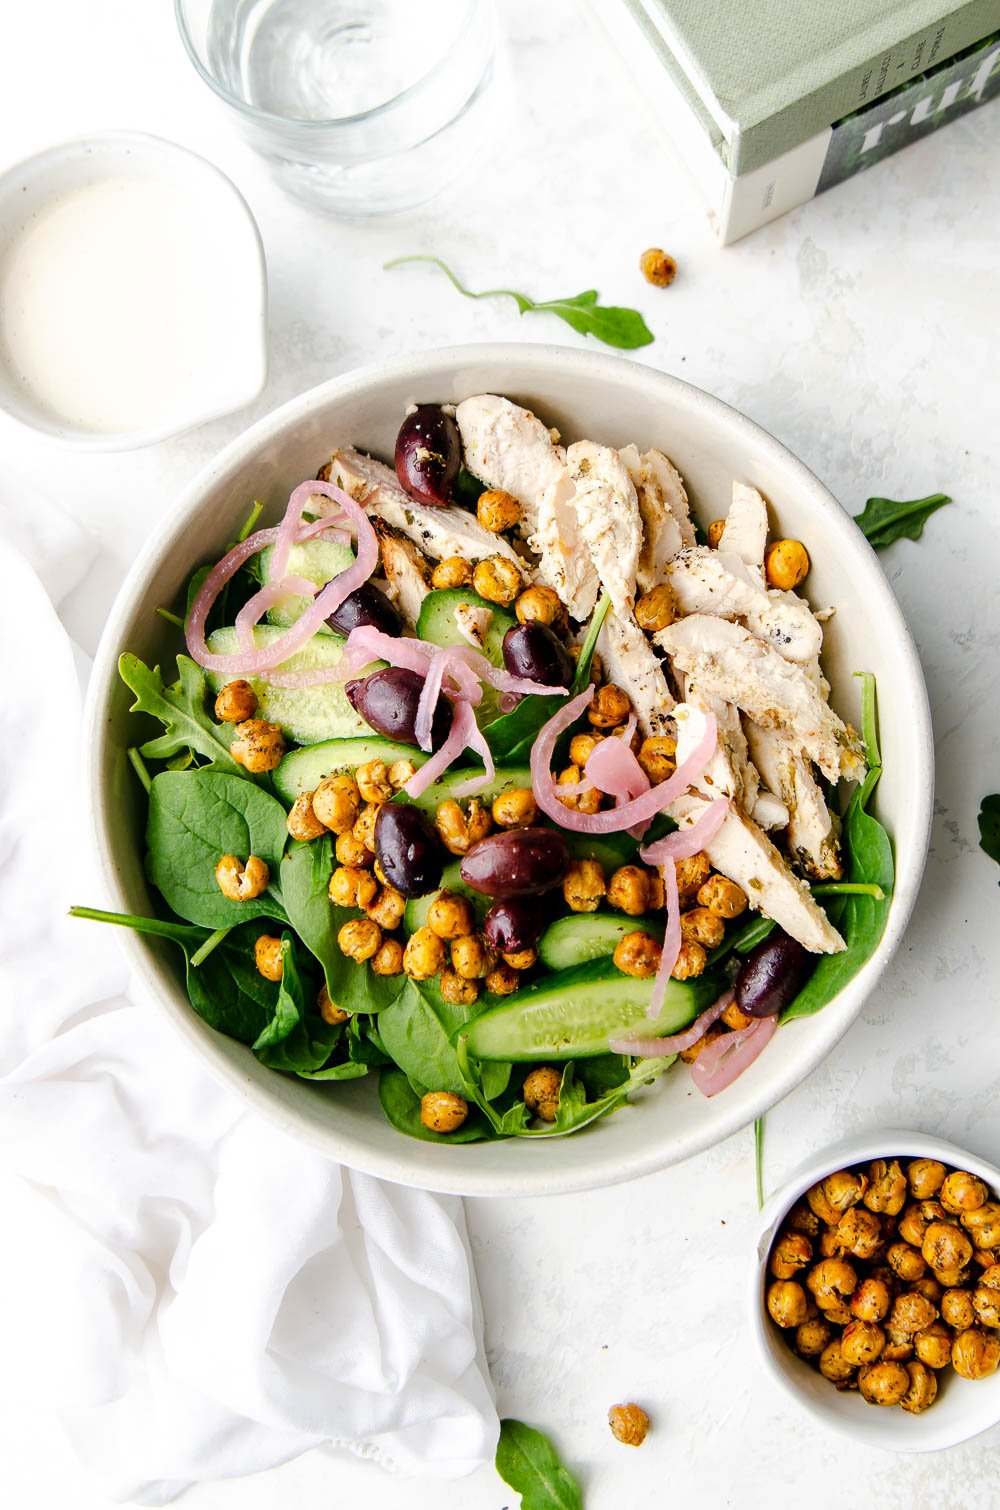 Bowl of arugula and spinach greens layered with kalamata olives, cucumbers, roasted chickpeas, greek grilled chicken and pickled onions. Served on the side with extra chickpeas and a bowl of tahini lemon dressing.